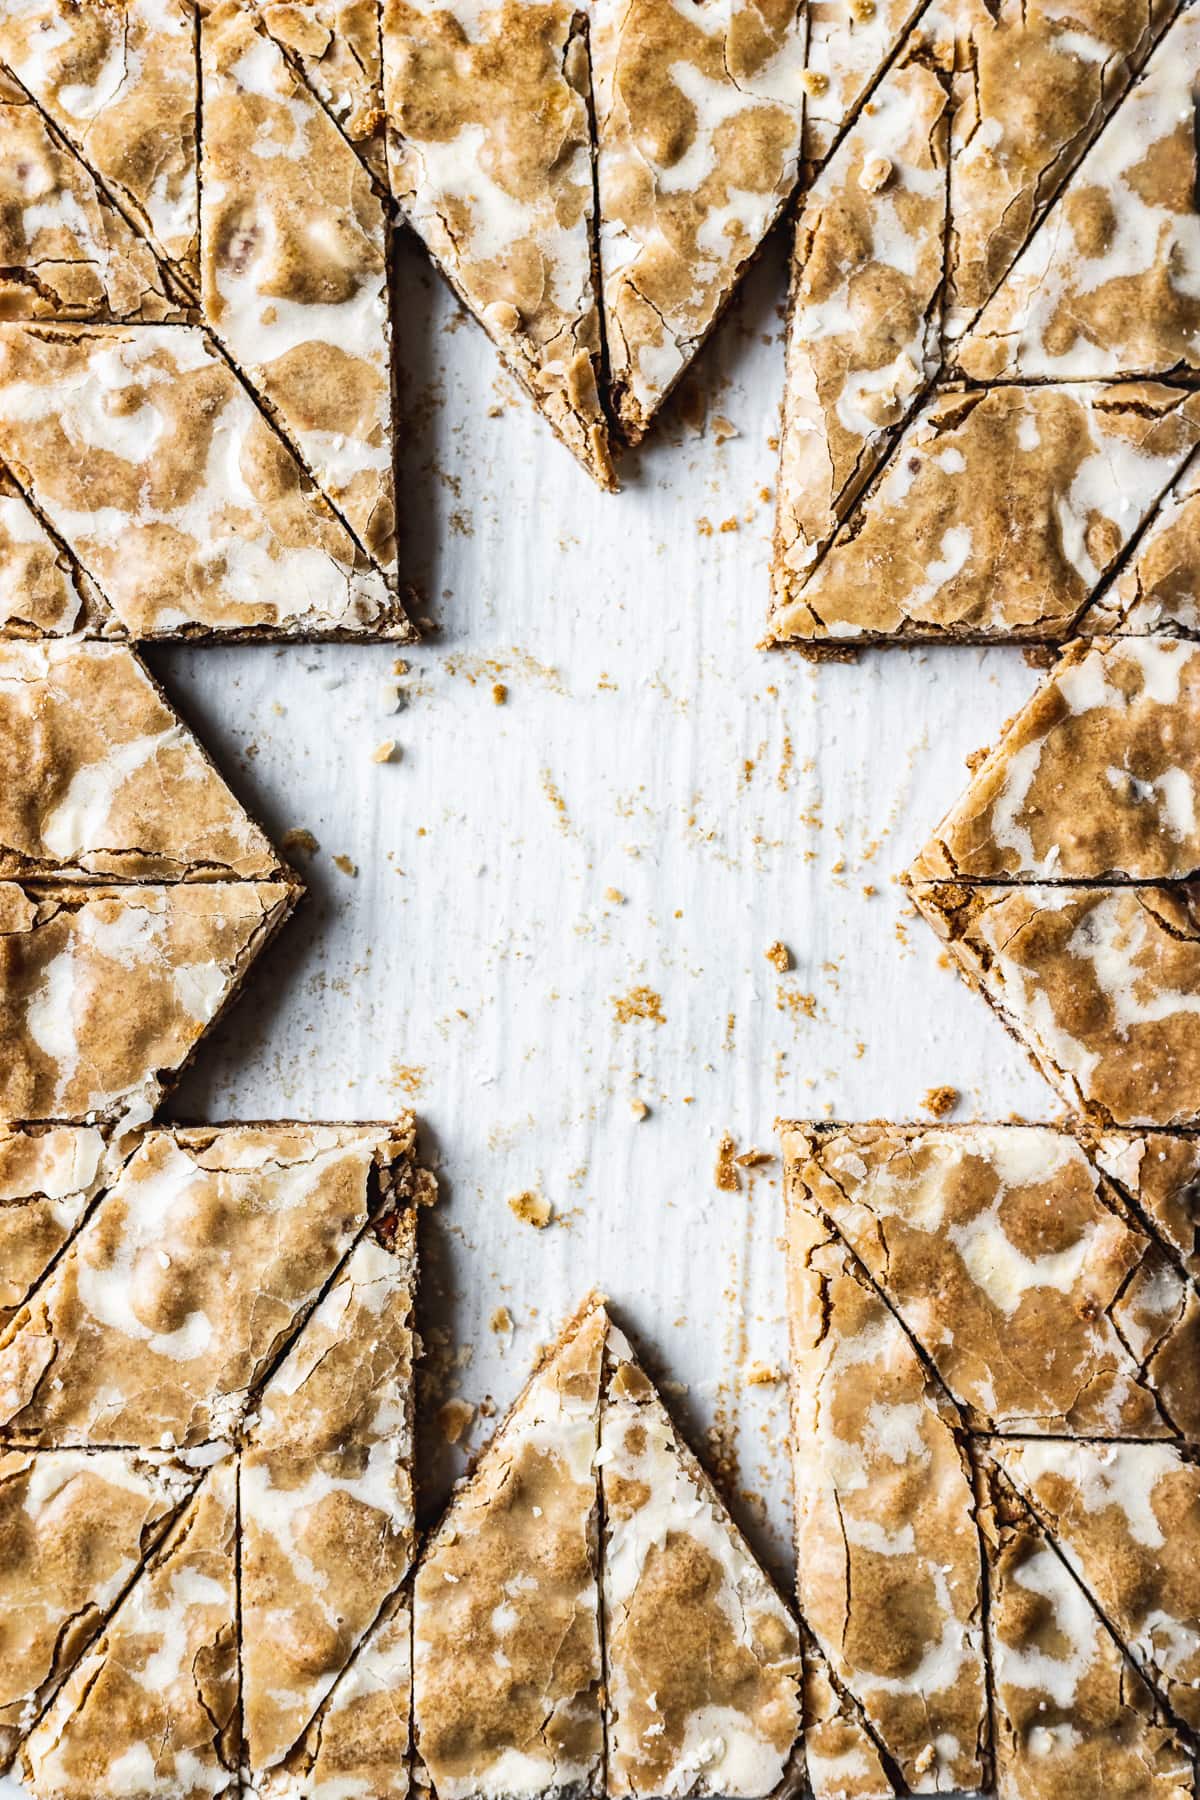 A closeup of bar cookies cut into a decorative holiday star pattern. The cookies in the middle have been removed, revealing the white parchment paper below in the shape of an eight pointed star.